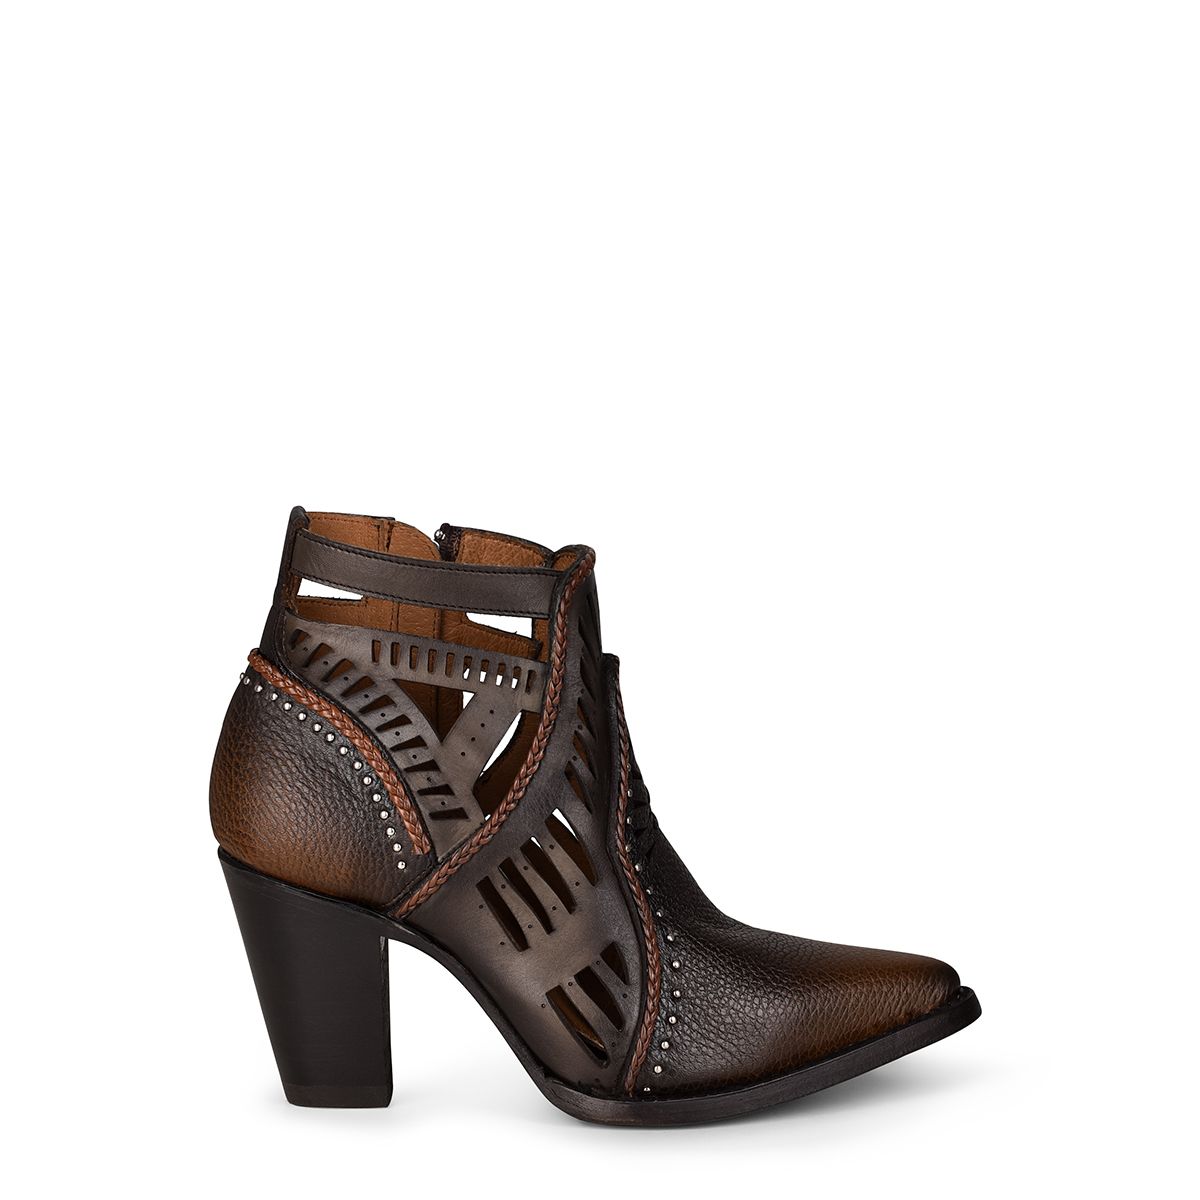 4I07RS - Cuadra honey summer casual leather ankle booties for women-CUADRA-Kuet-Cuadra-Boots